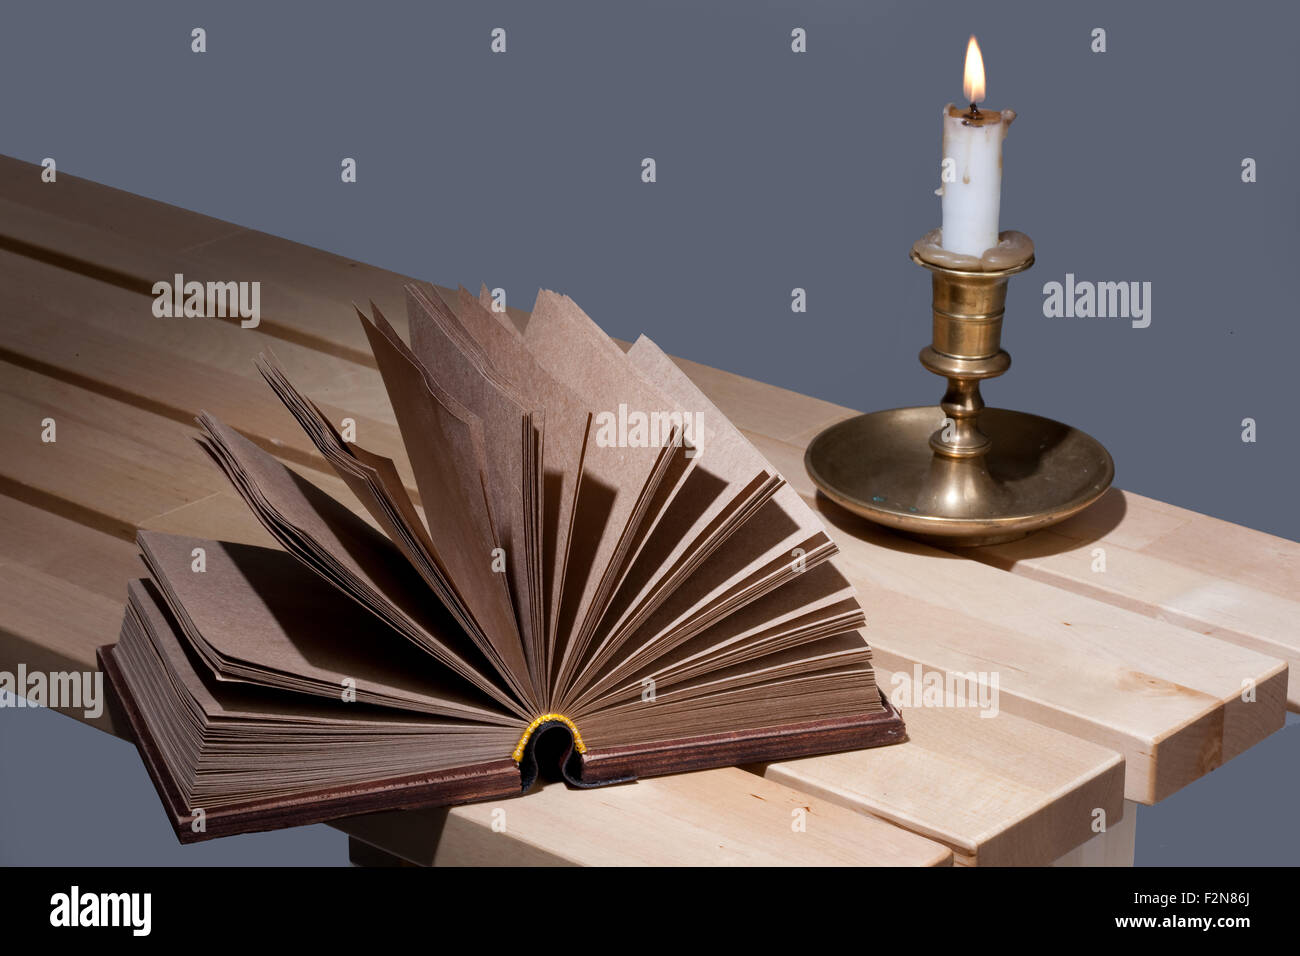 book candle candlestick wood retro old object still life bench surface brown fire flame copper bronze antique ancient symbol Stock Photo